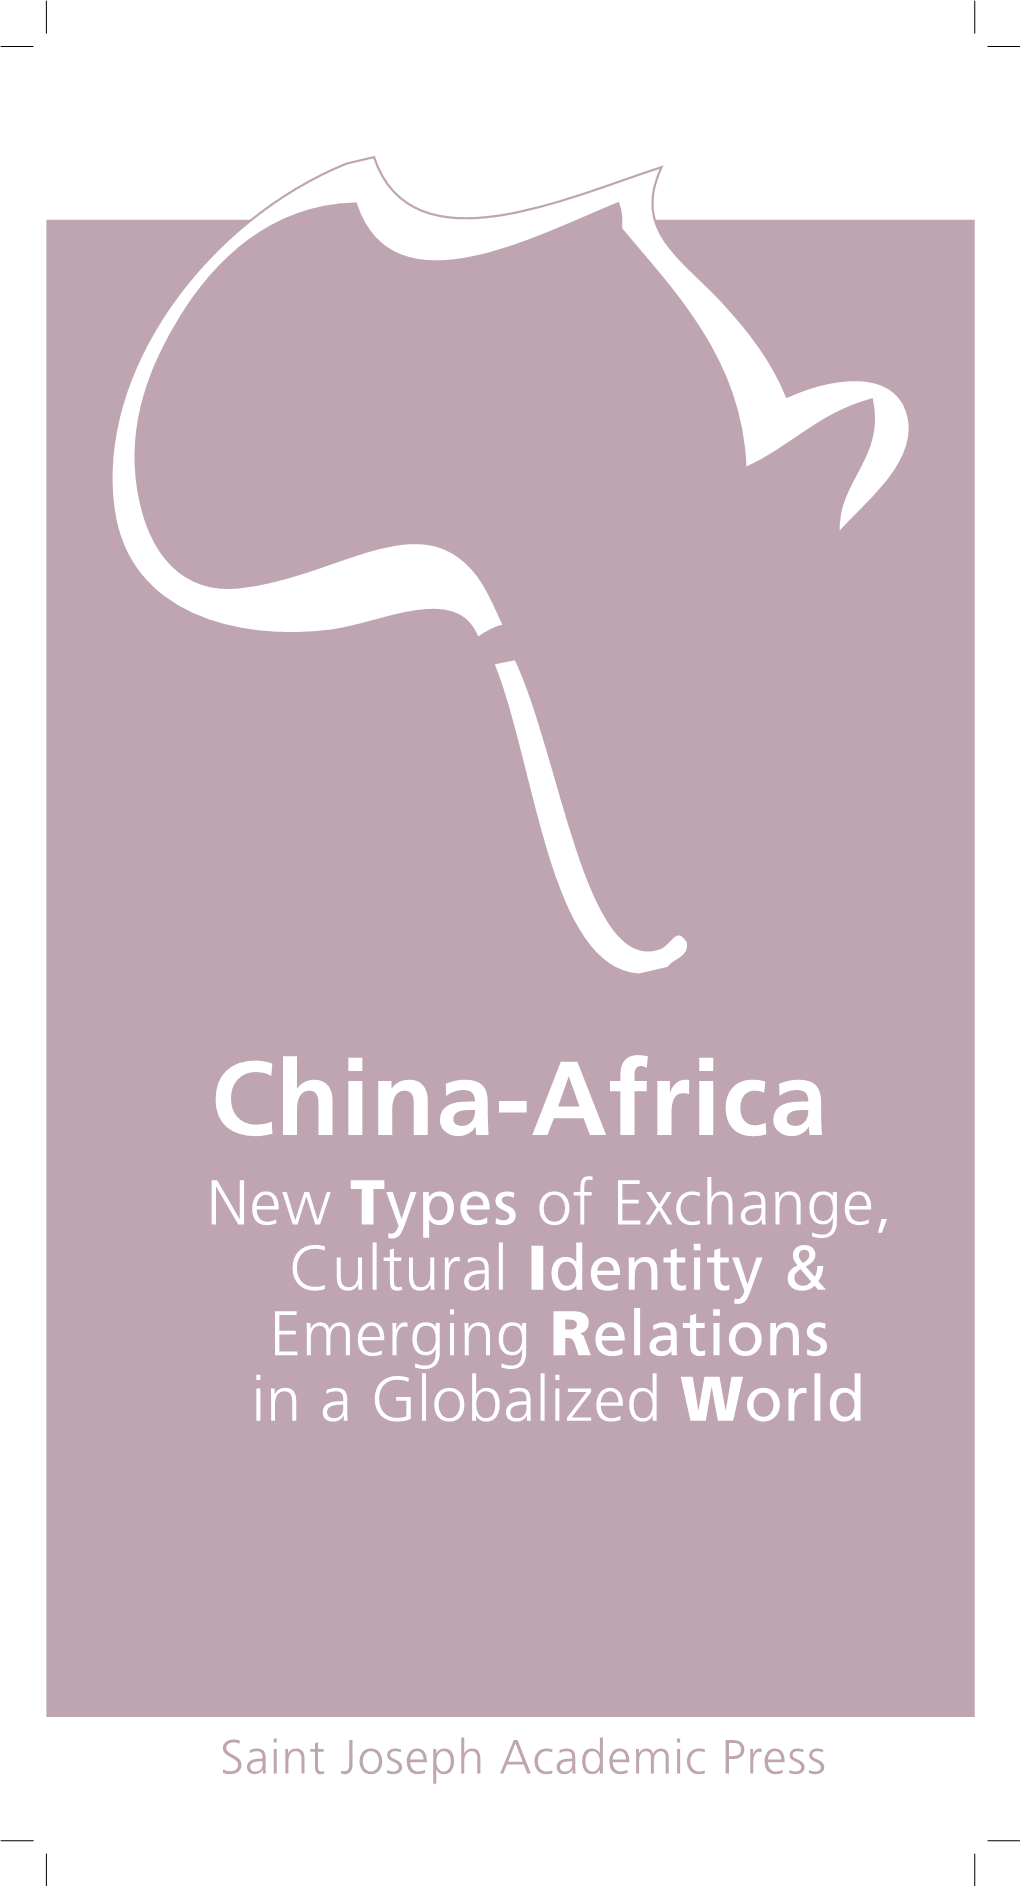 Saint Joseph Academic Press New Types of Exchange Cultural Identity and Emerging Relations in a Globalized World